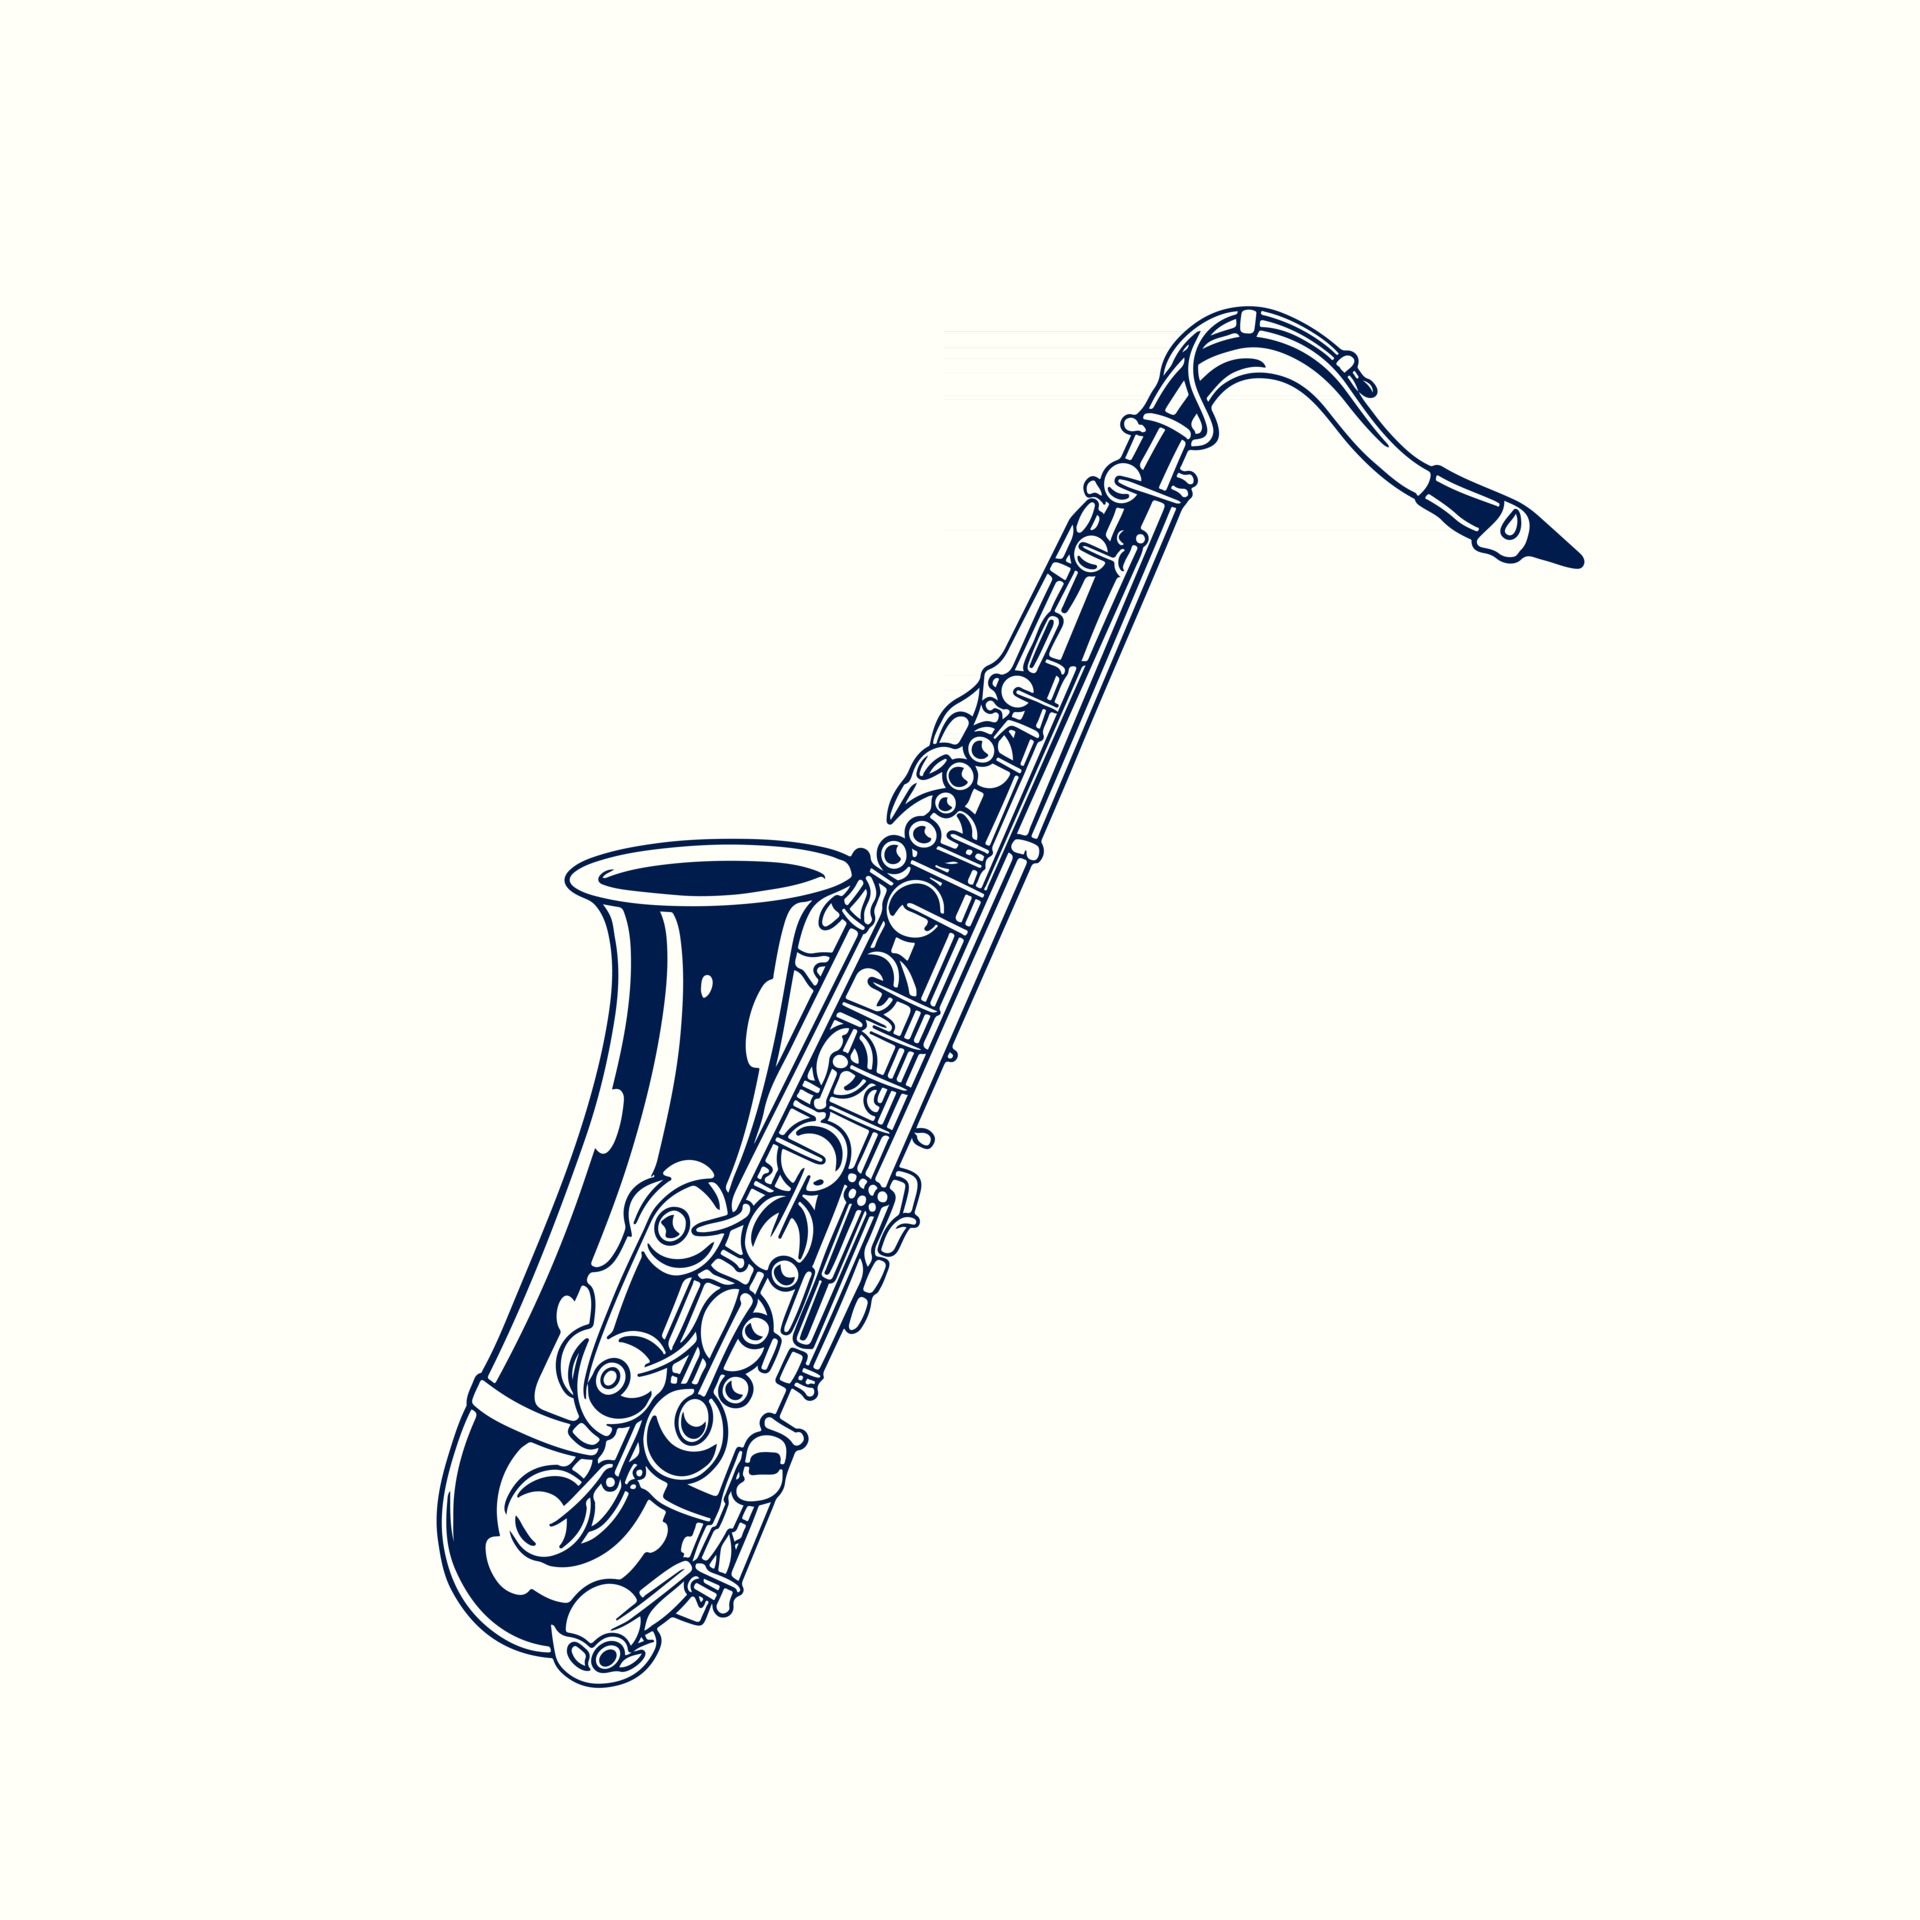 https://static.vecteezy.com/ti/vecteur-libre/p3/2734745-saxophone-hand-drawn-sketch-retro-design-classical-jazz-music-instrument-in-cartoon-isolated-wind-musical-tool-concept-vector-illustration-in-vintage-graved-style-on-white-contexte-vectoriel.jpg